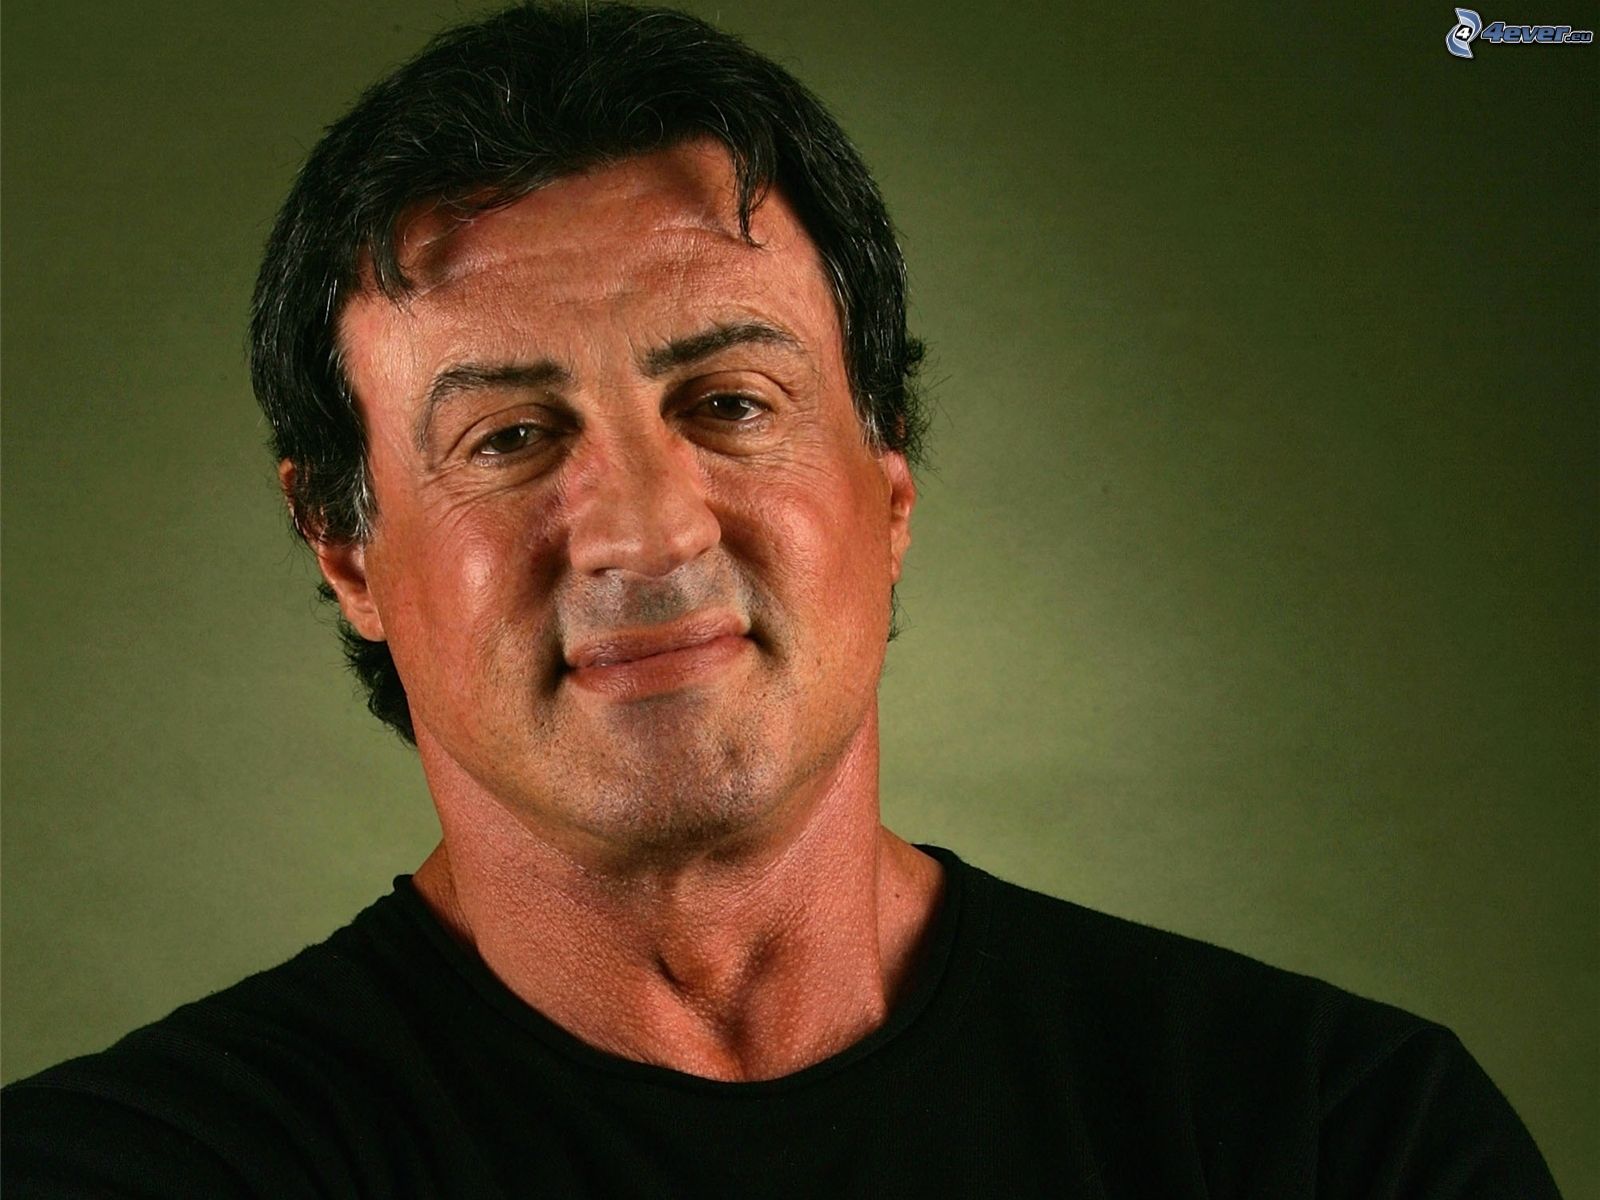 Sylvester Stallone download free wallpapers